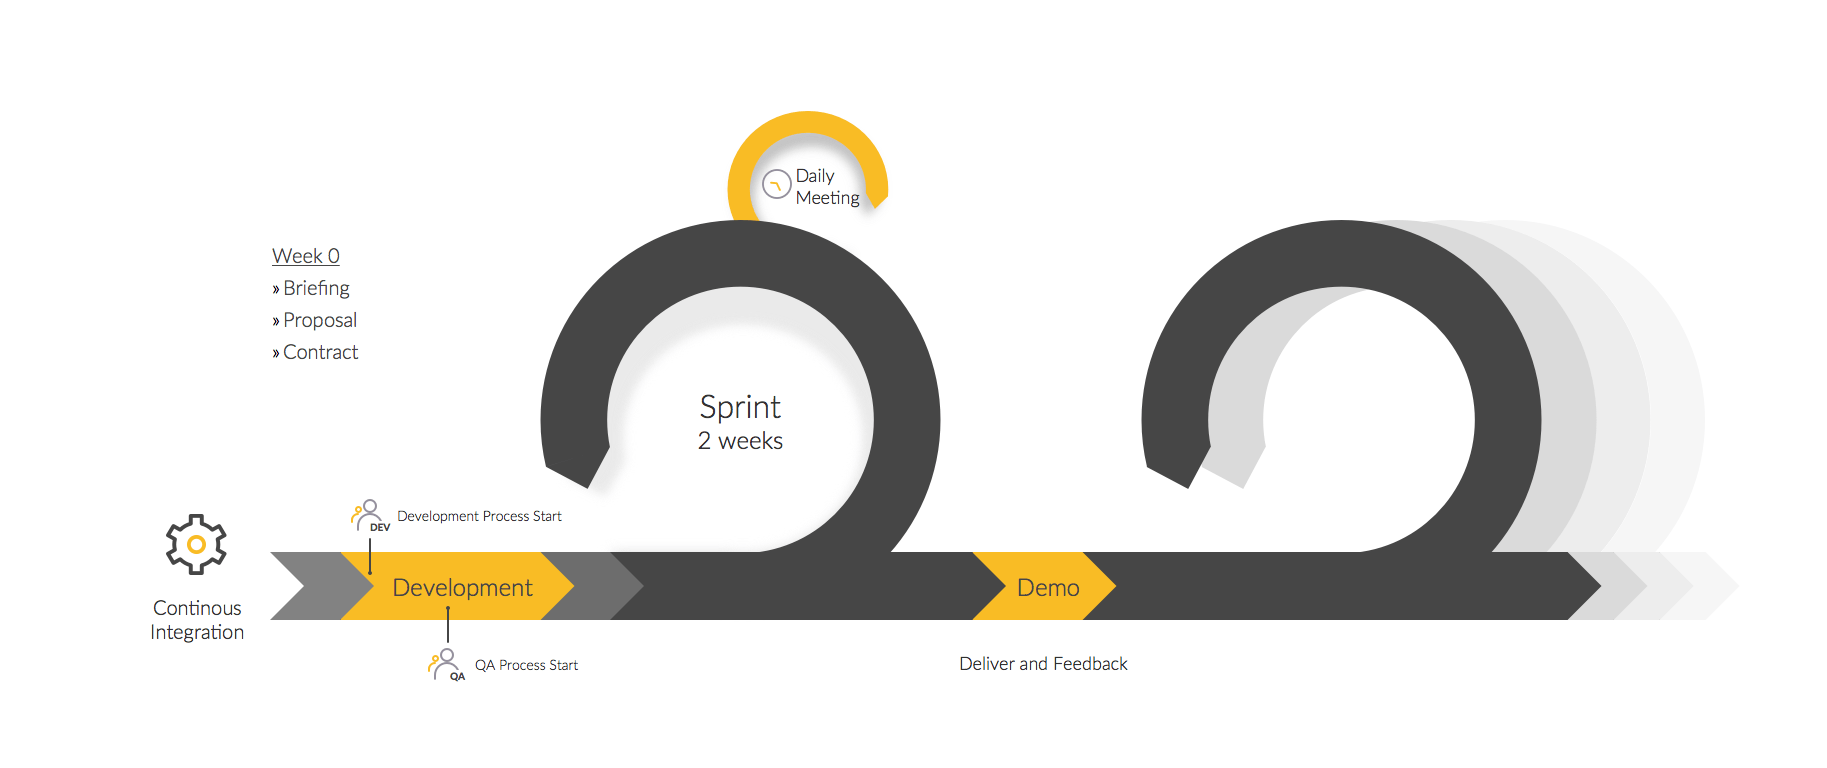 Scrum Logo - Scrum sprint explanation you will learn a lot from